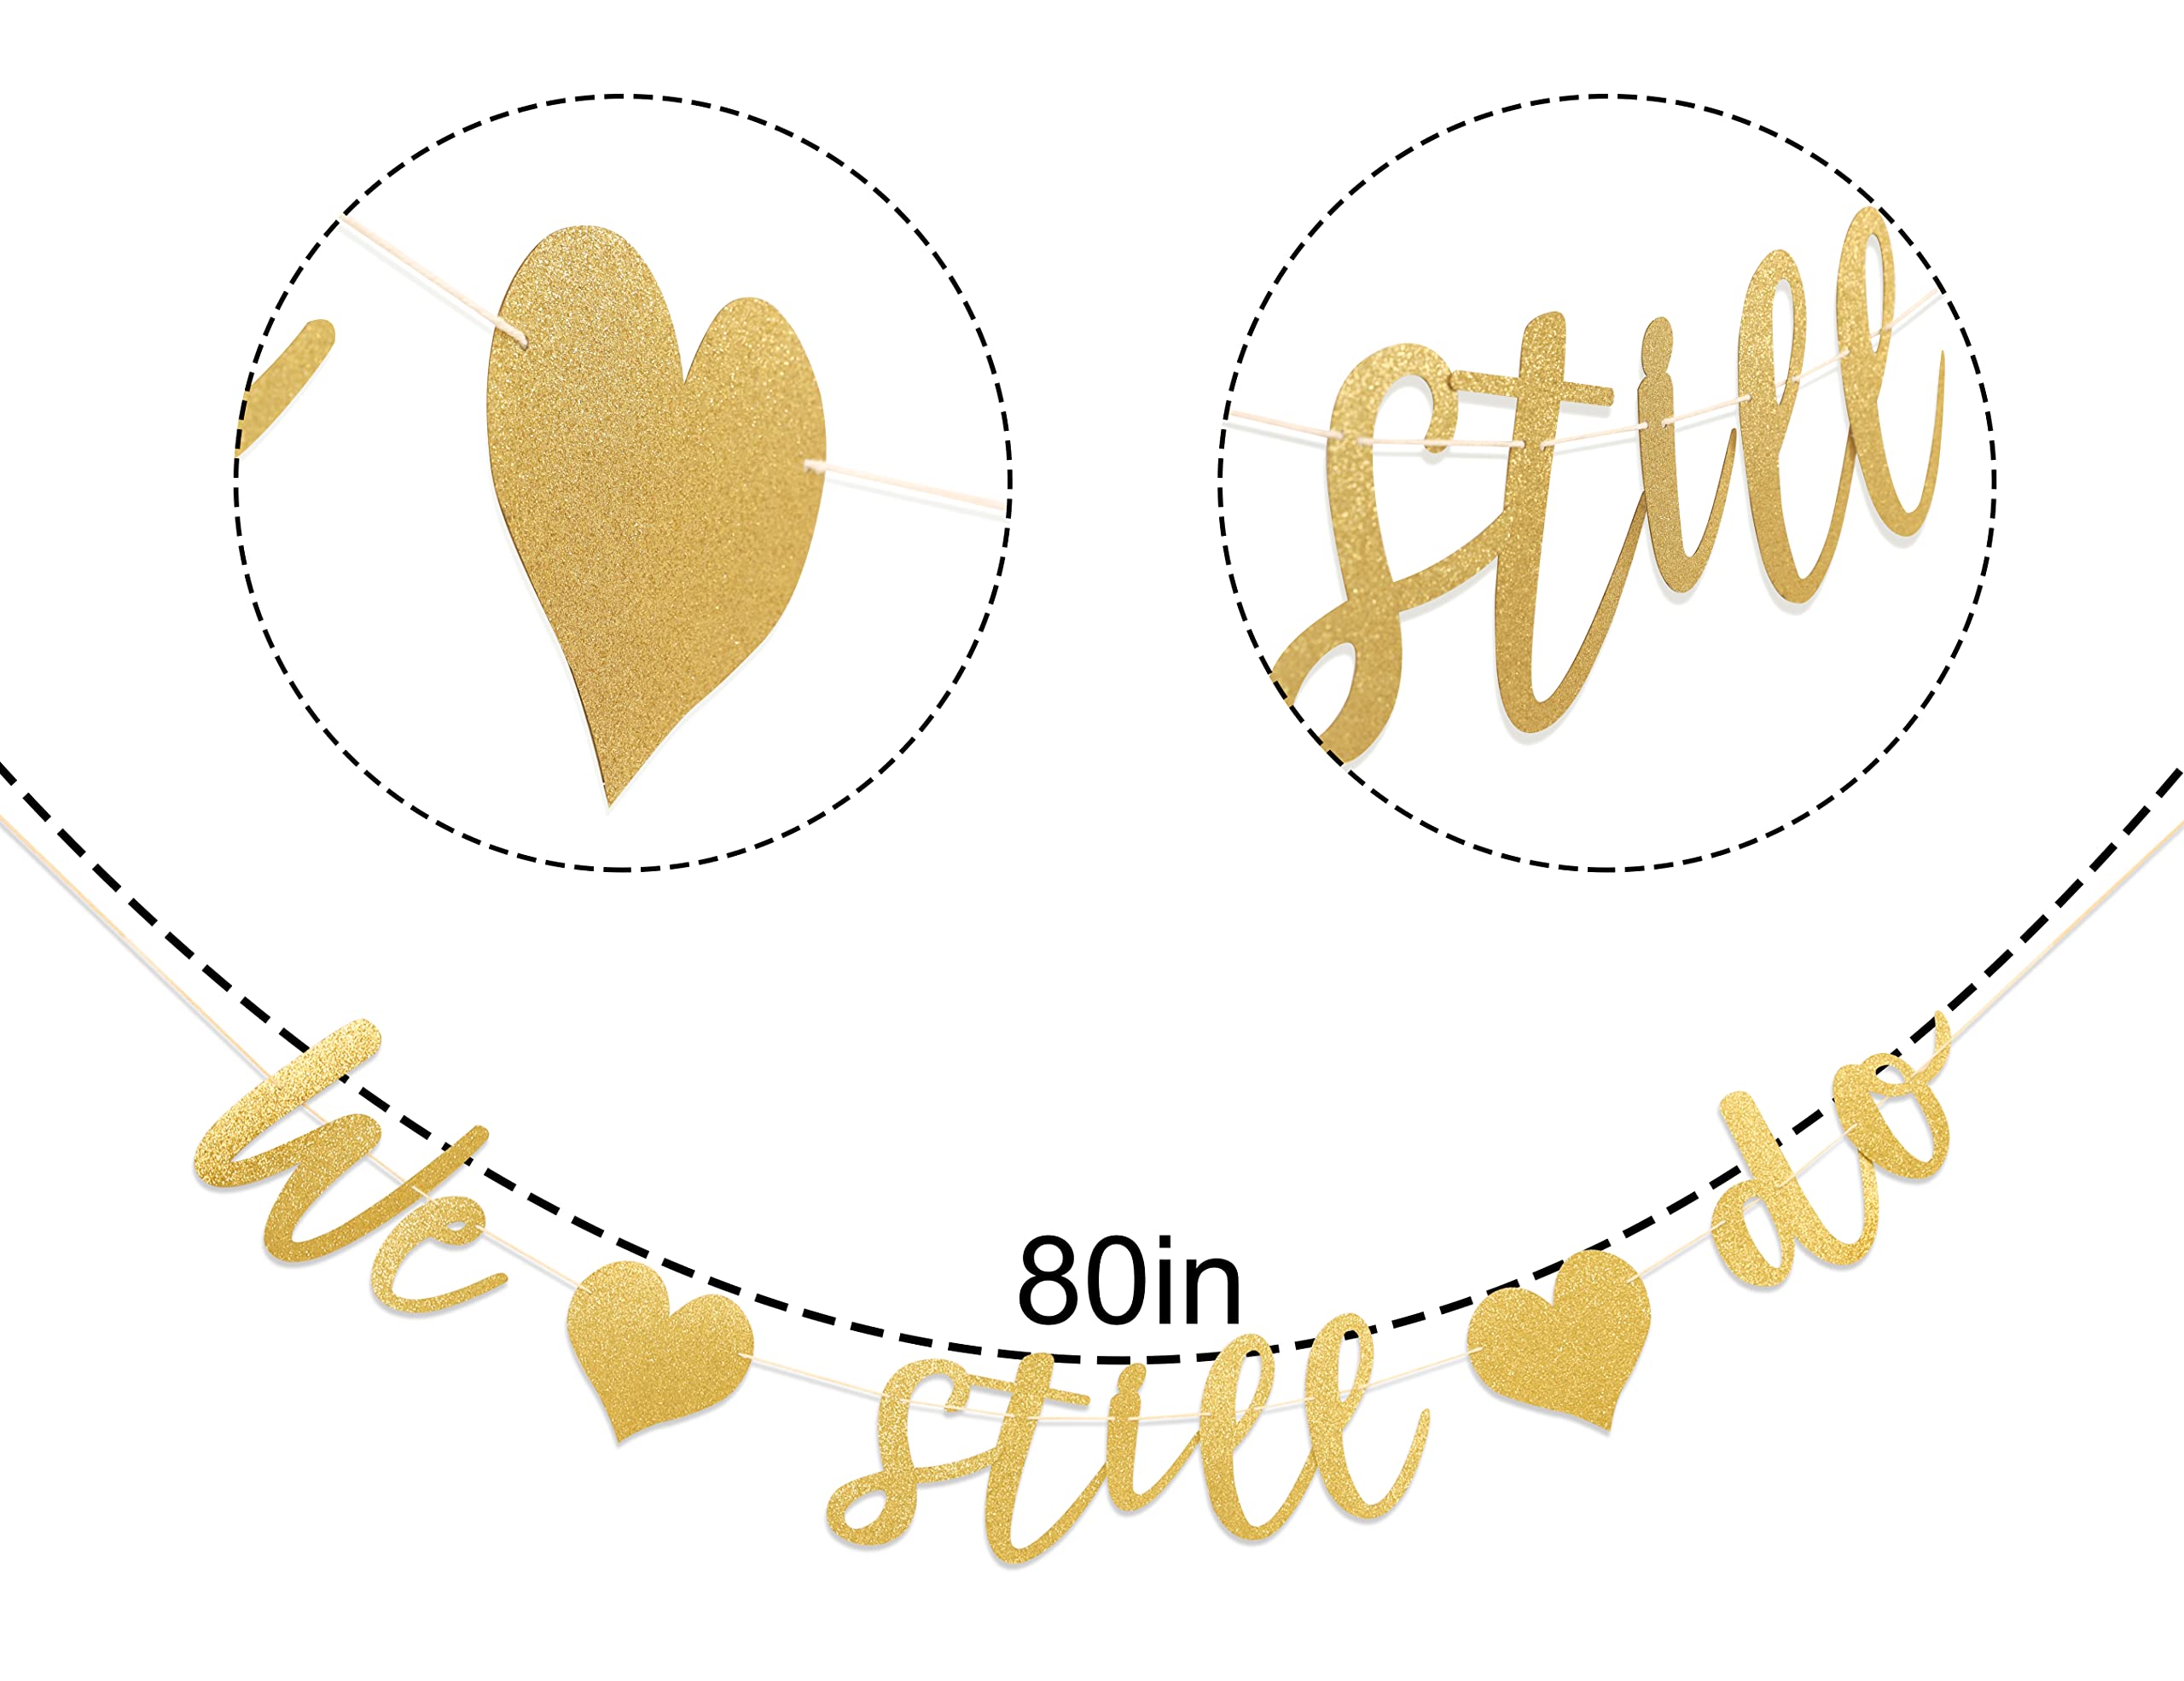 we still do banner - Bridal Shower Banner Decorations, wedding anniversary party decorations engagement banner,bride banner Party decorations